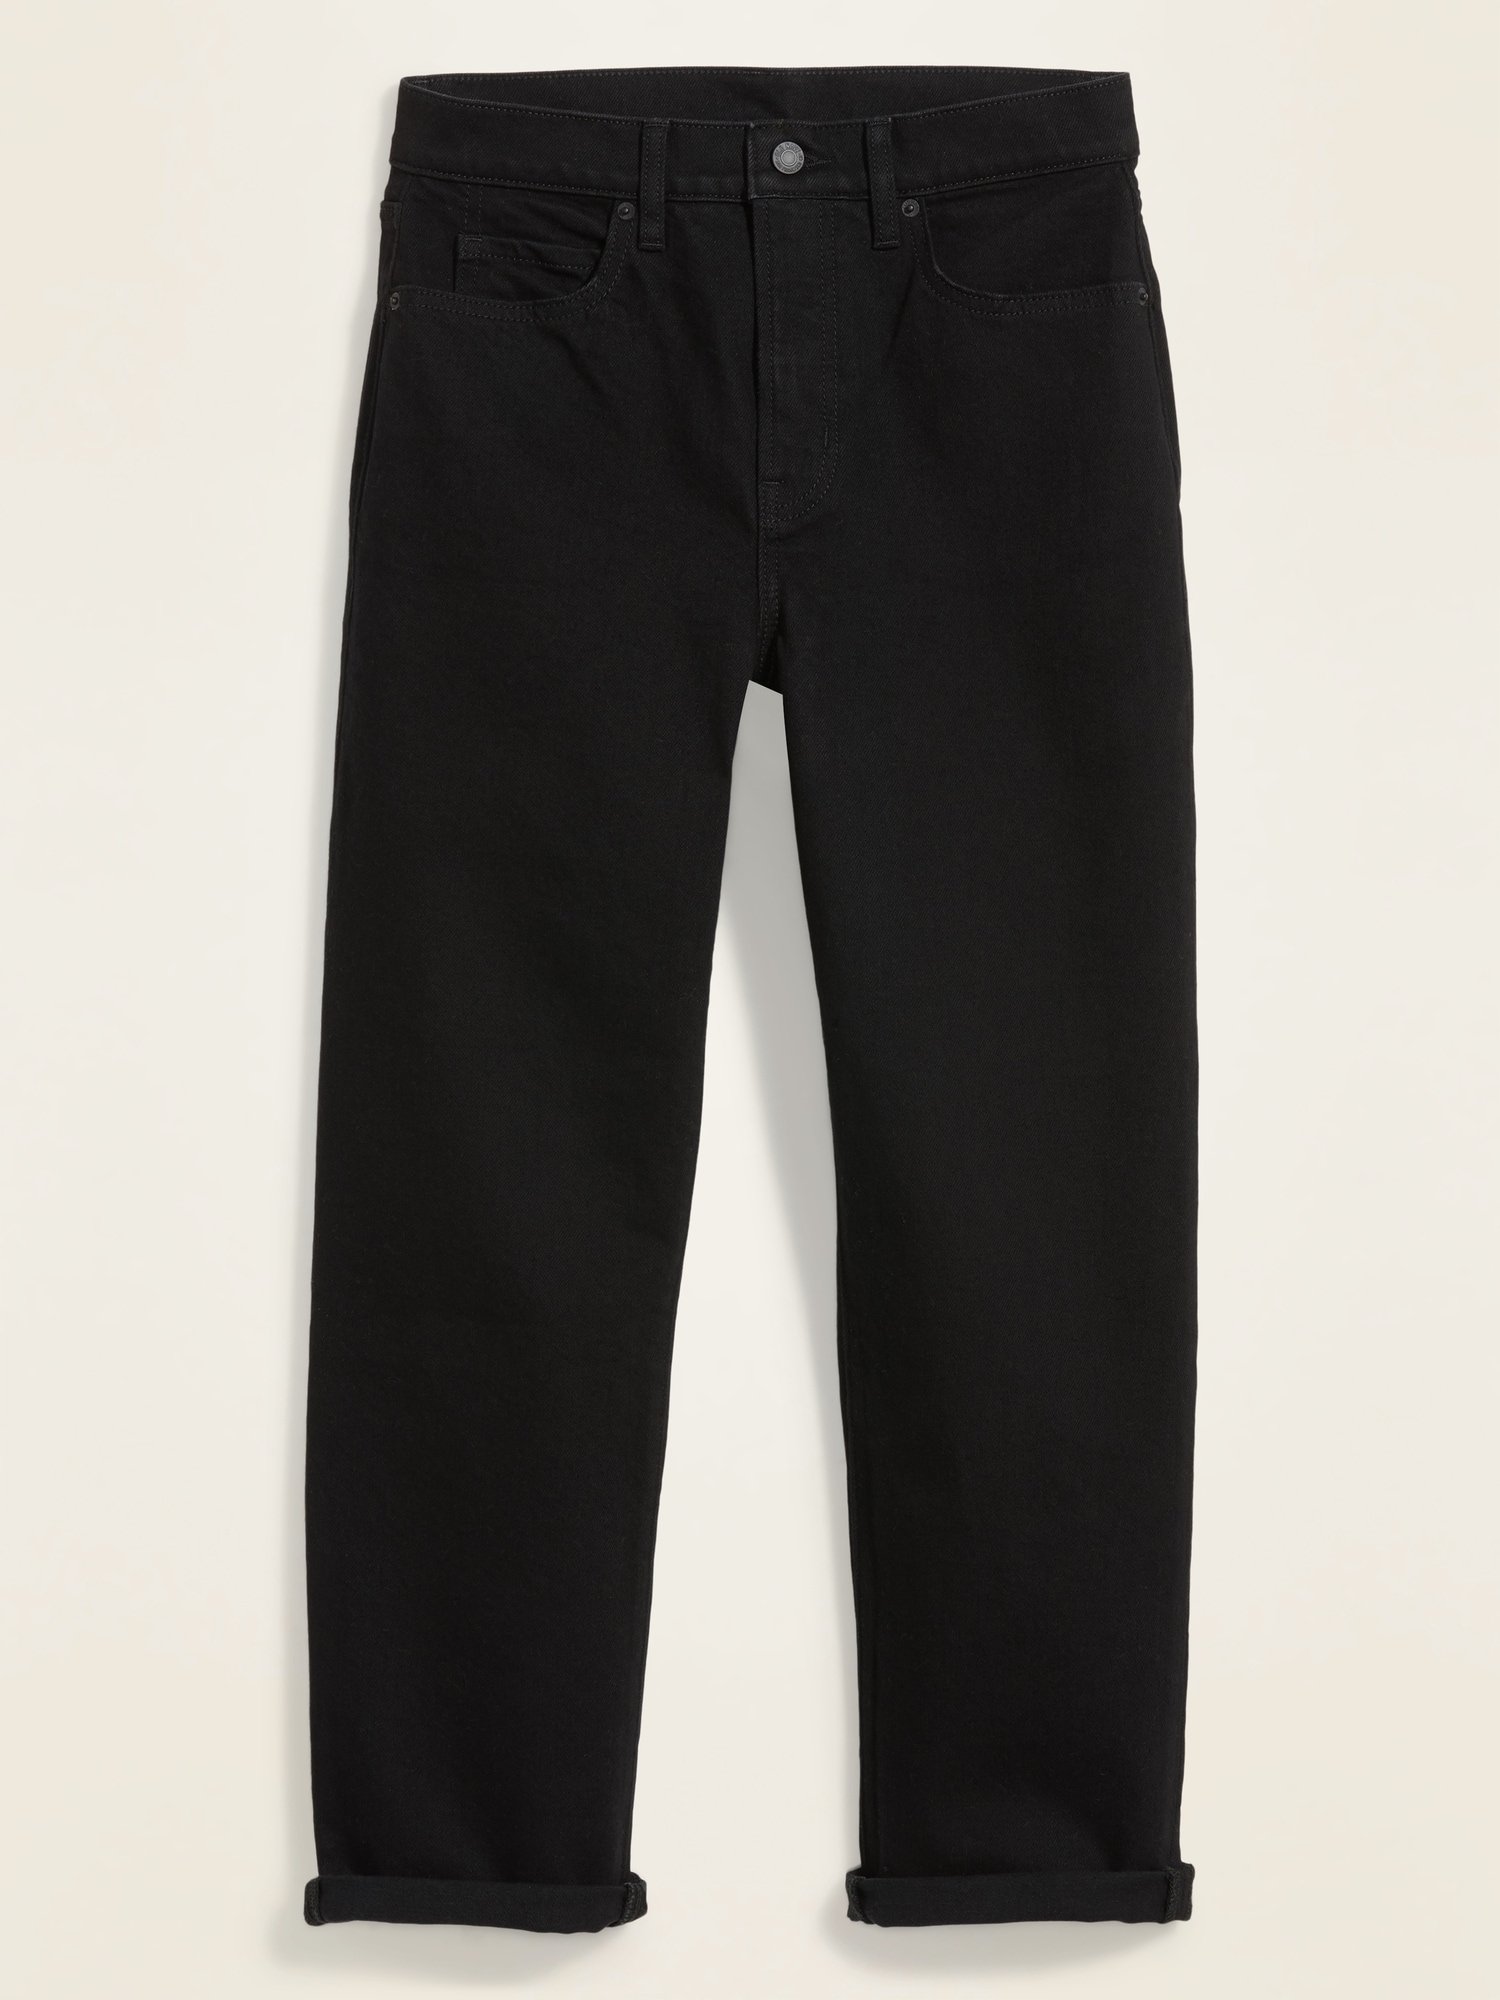 Extra High-Waisted Sky-Hi Straight Black Jeans for Women | Old Navy